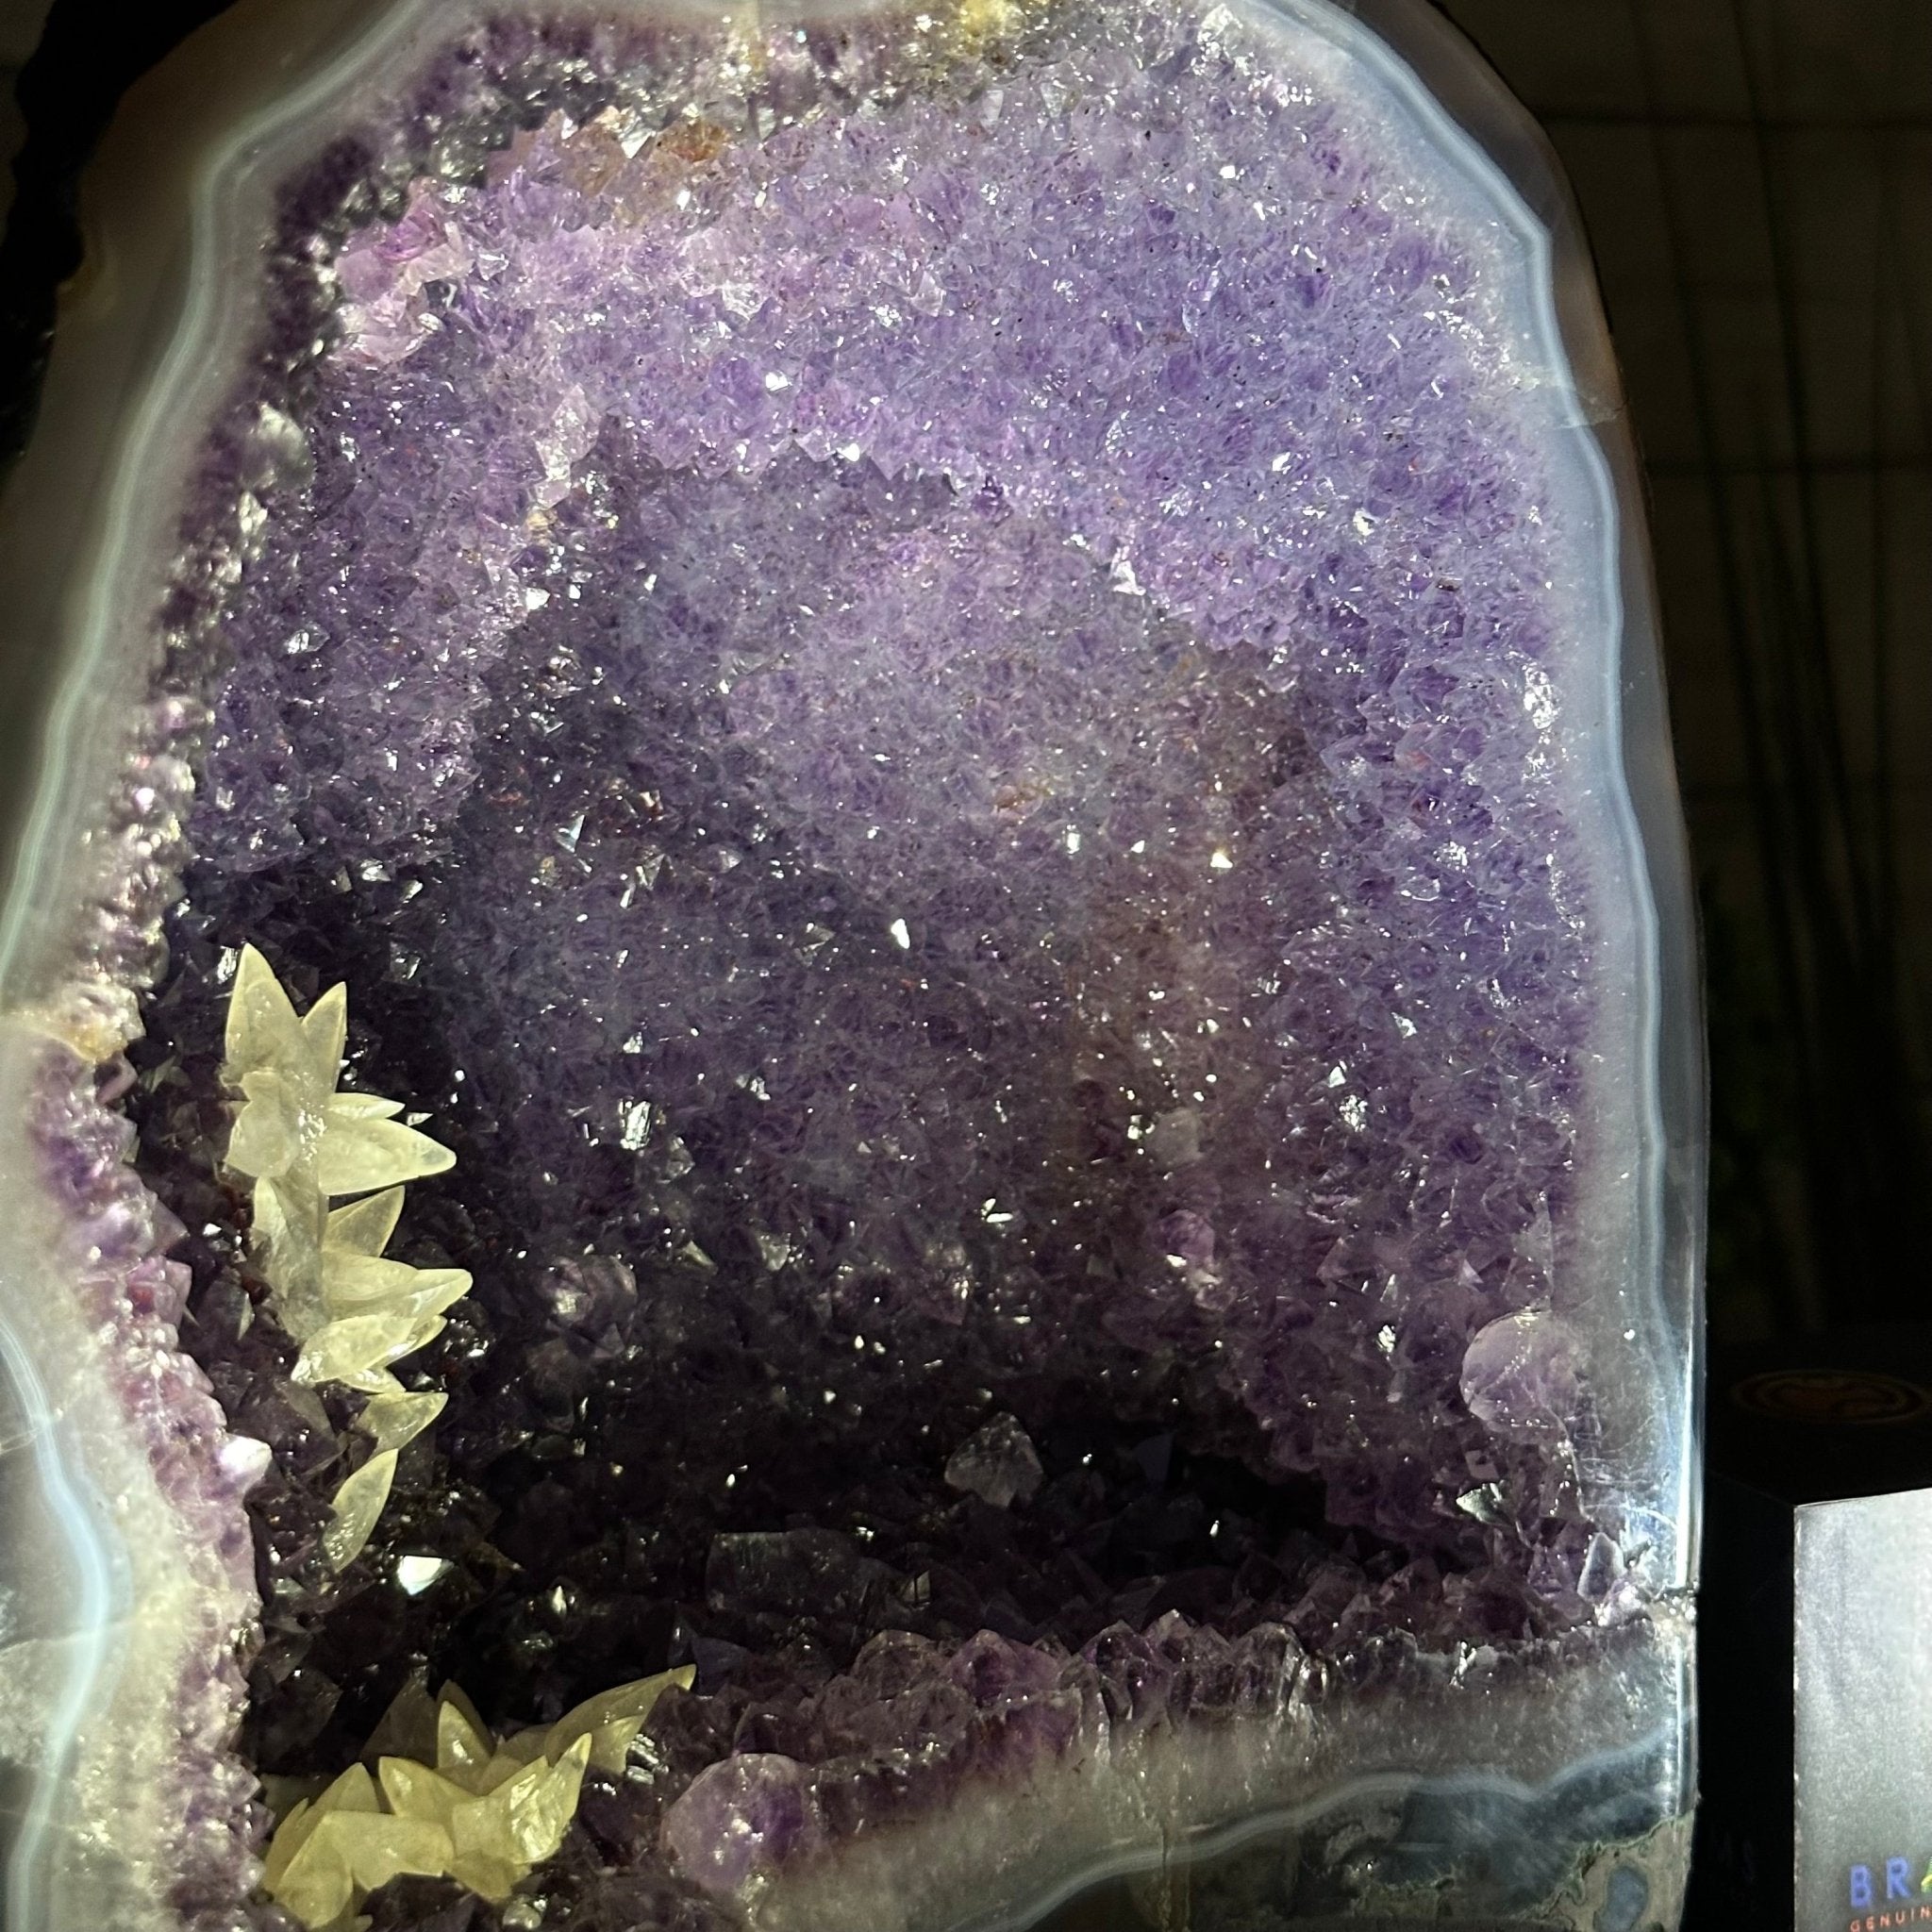 Quality Brazilian Amethyst Cathedral, 17.7 lbs & 9.5" Tall, #5601 - 1377 - Brazil GemsBrazil GemsQuality Brazilian Amethyst Cathedral, 17.7 lbs & 9.5" Tall, #5601 - 1377Cathedrals5601 - 1377